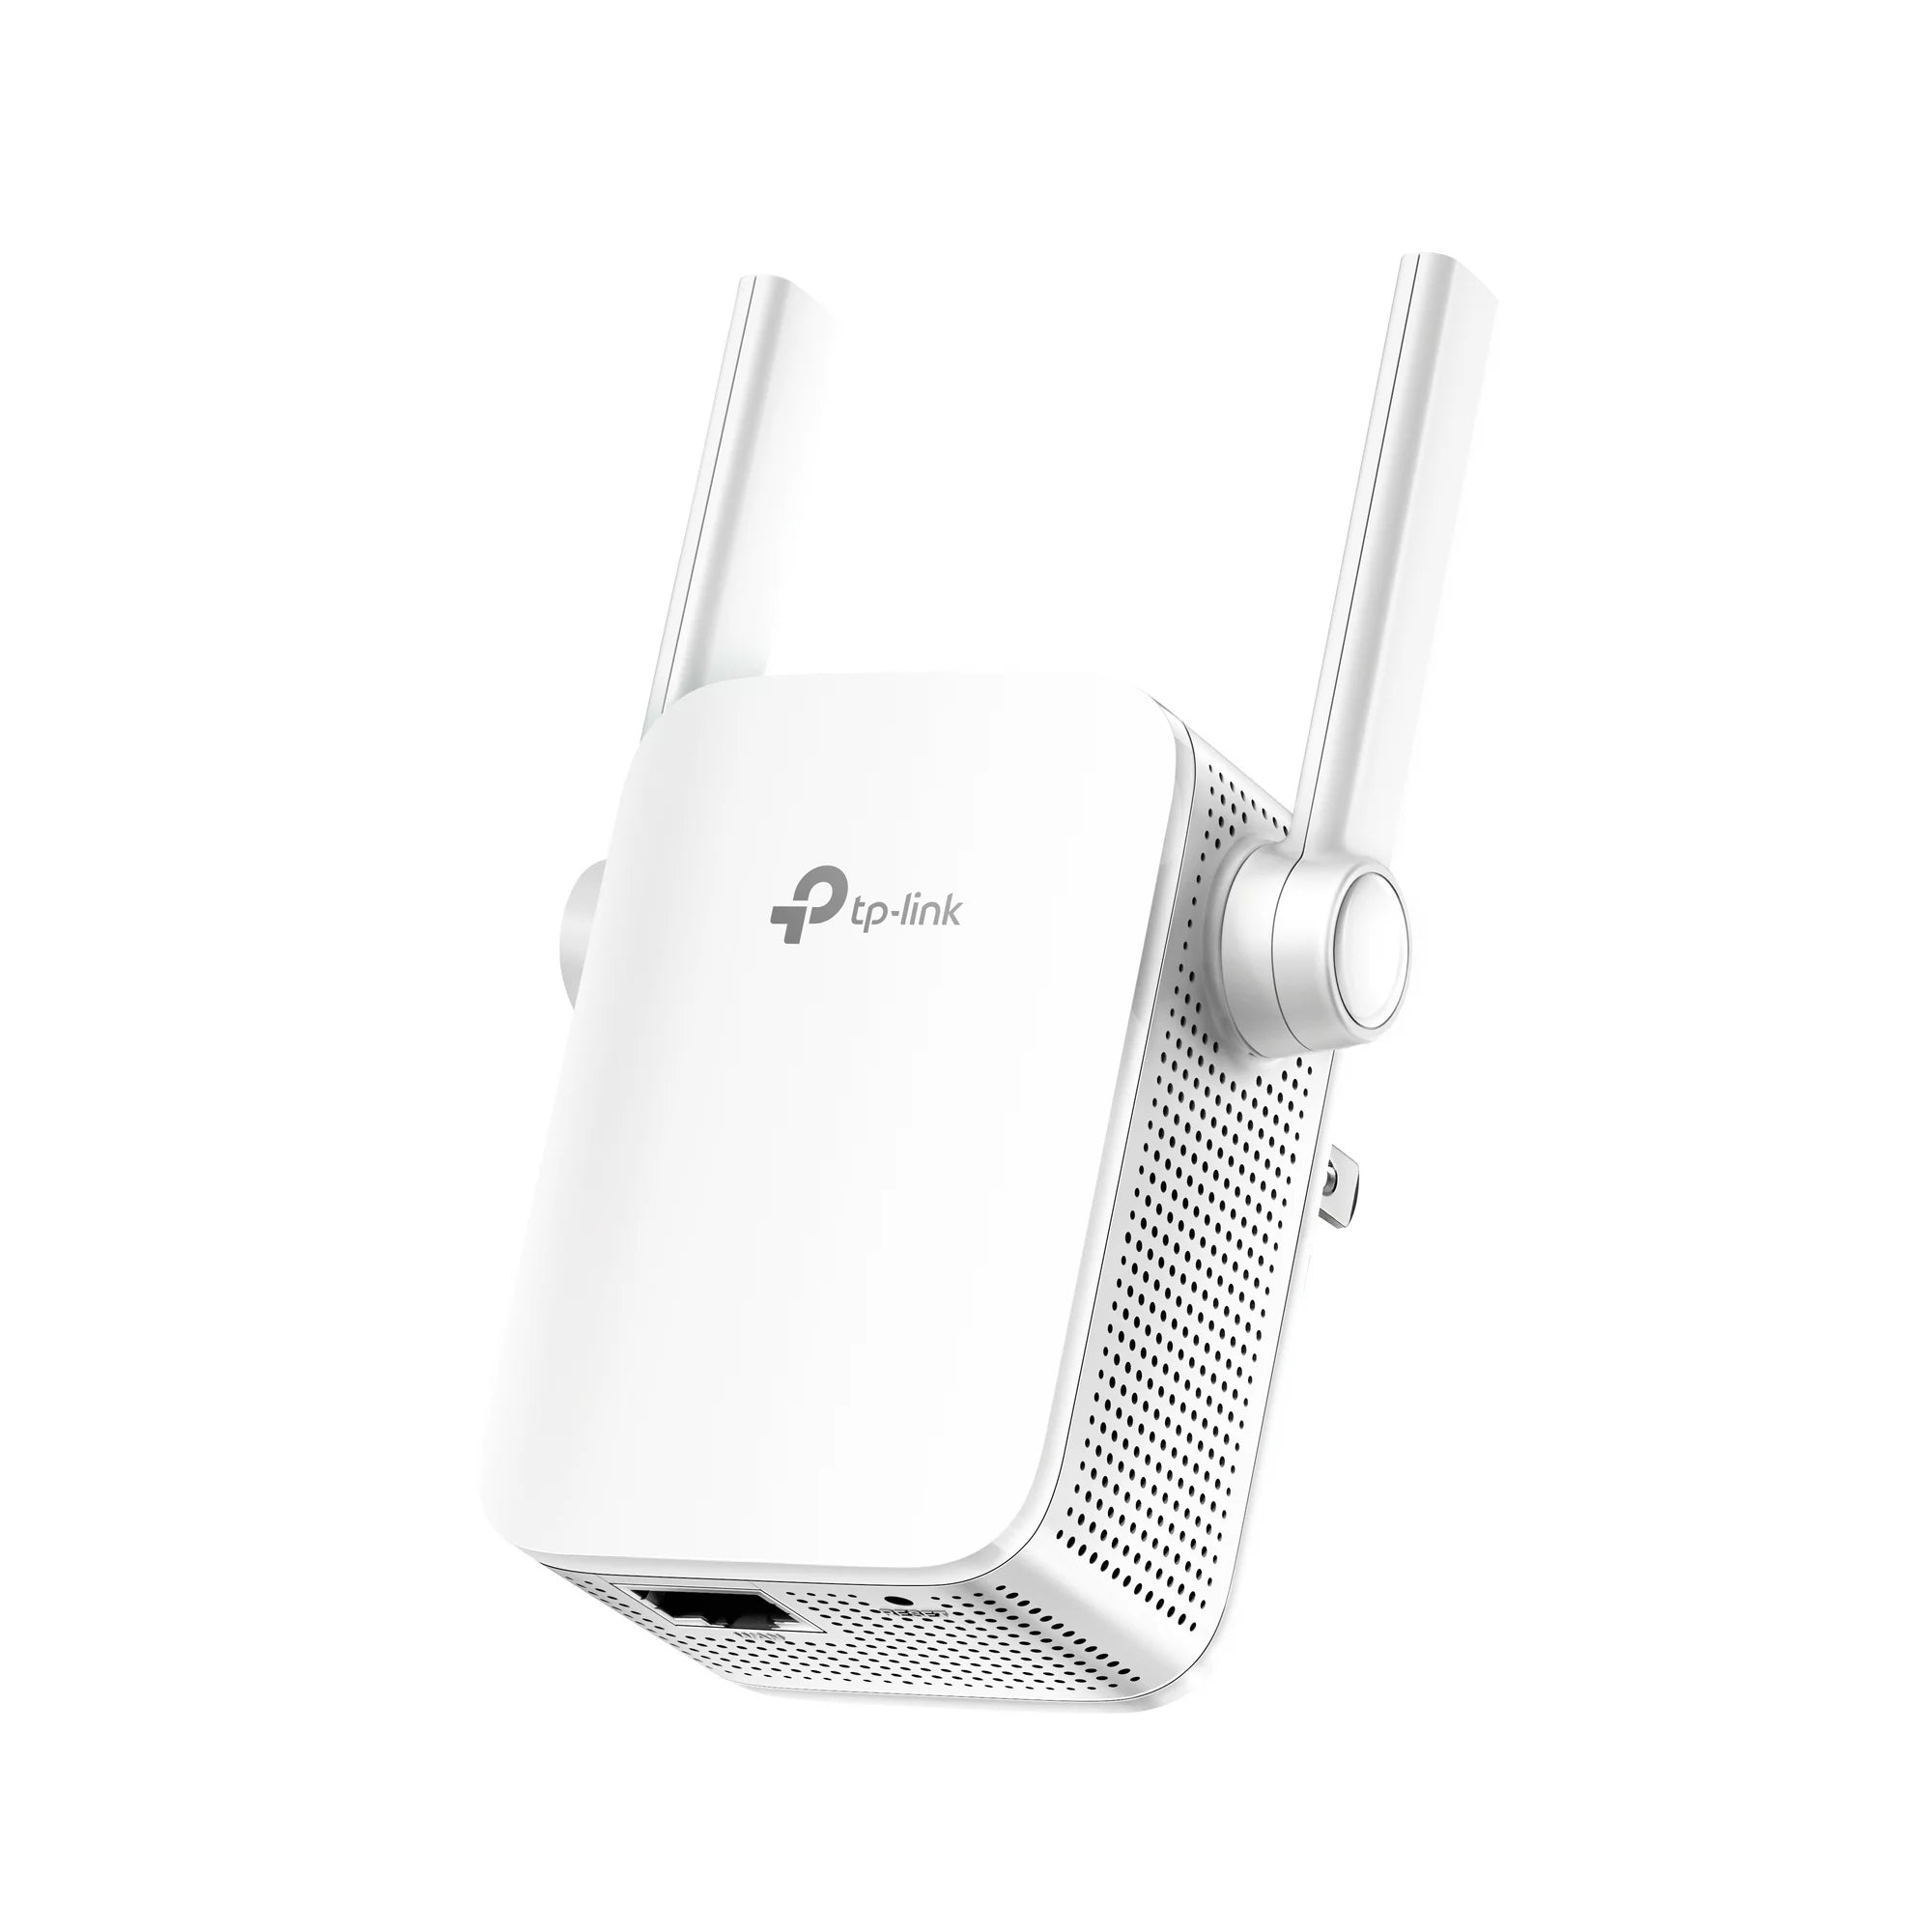 TP-Link AC1200 WiFi Range Extender - Up to 1200Mbps Dual Band WiFi Extender, Repeater, Wifi Signal Booster, Access Point (RE305)